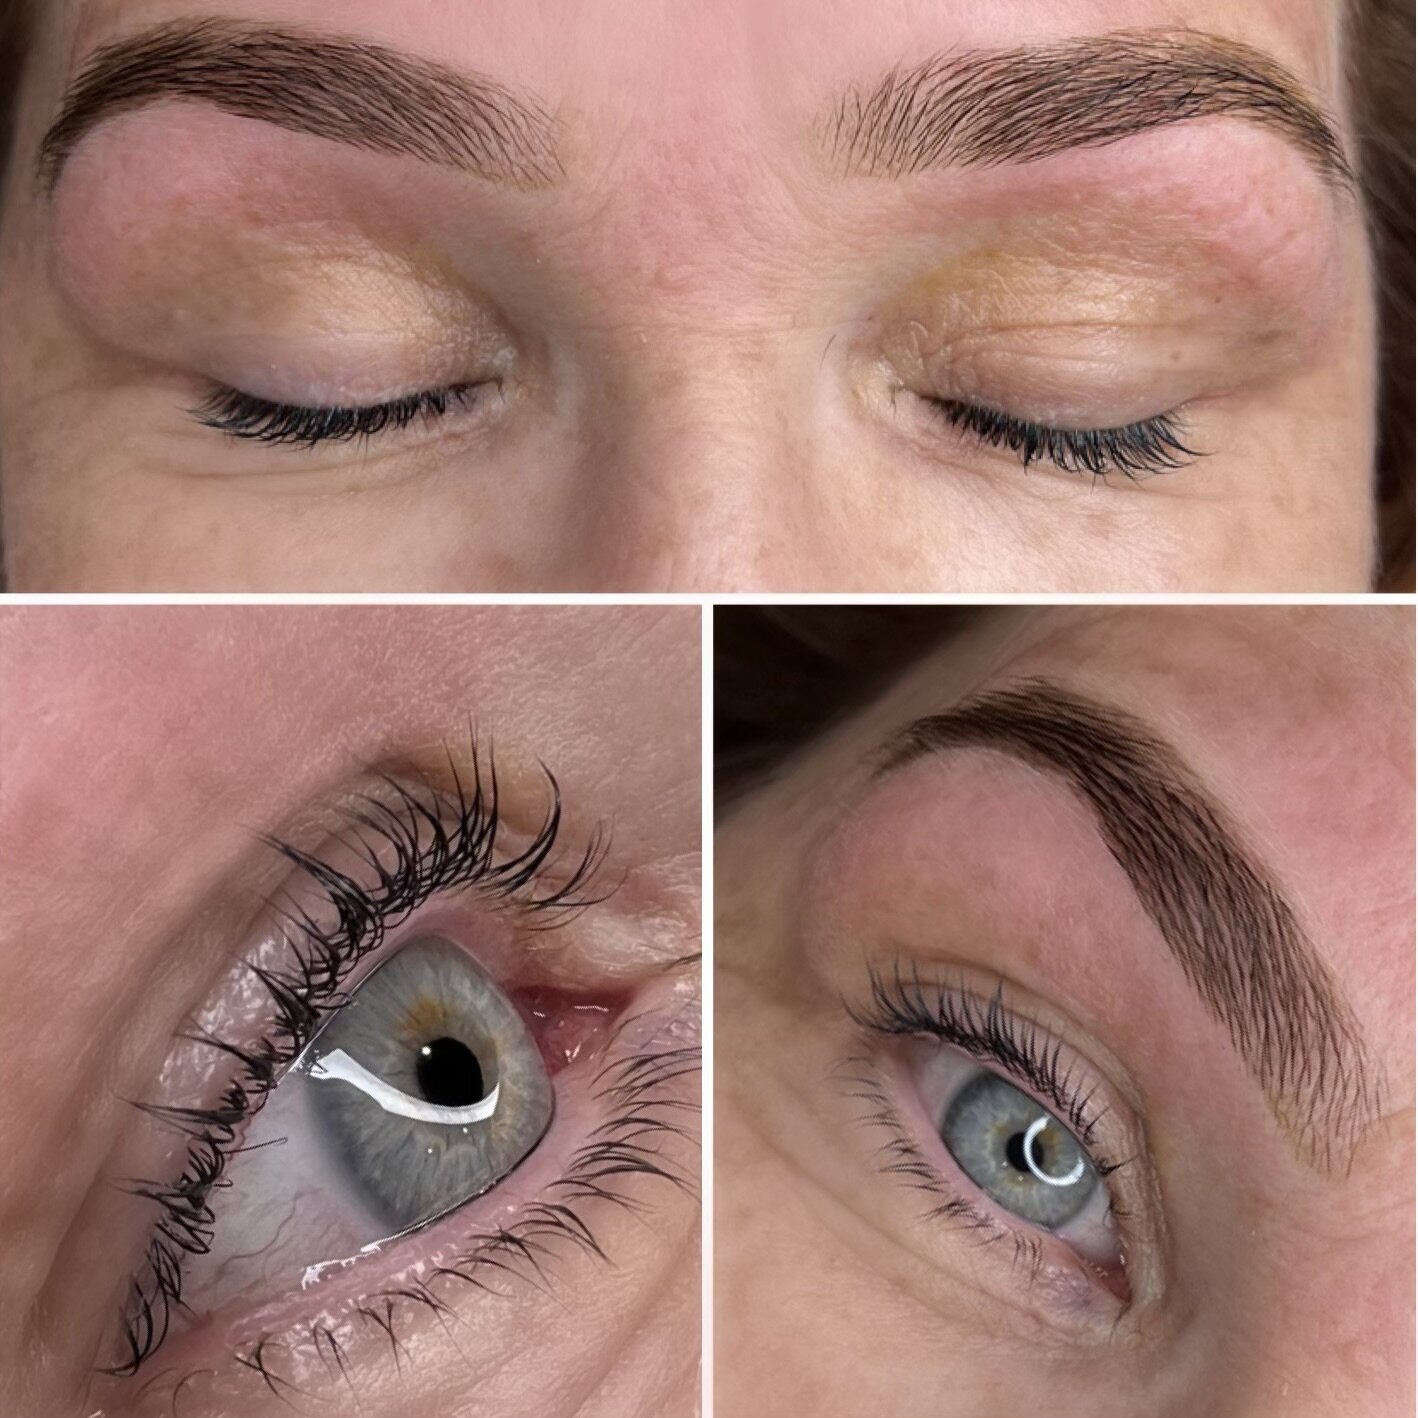 Hybrid Brow wax and dye with Lash Lift and Tint 😍
The Perfect Combo

#hybridbrows #browshaping #lashlift #lashtint #results